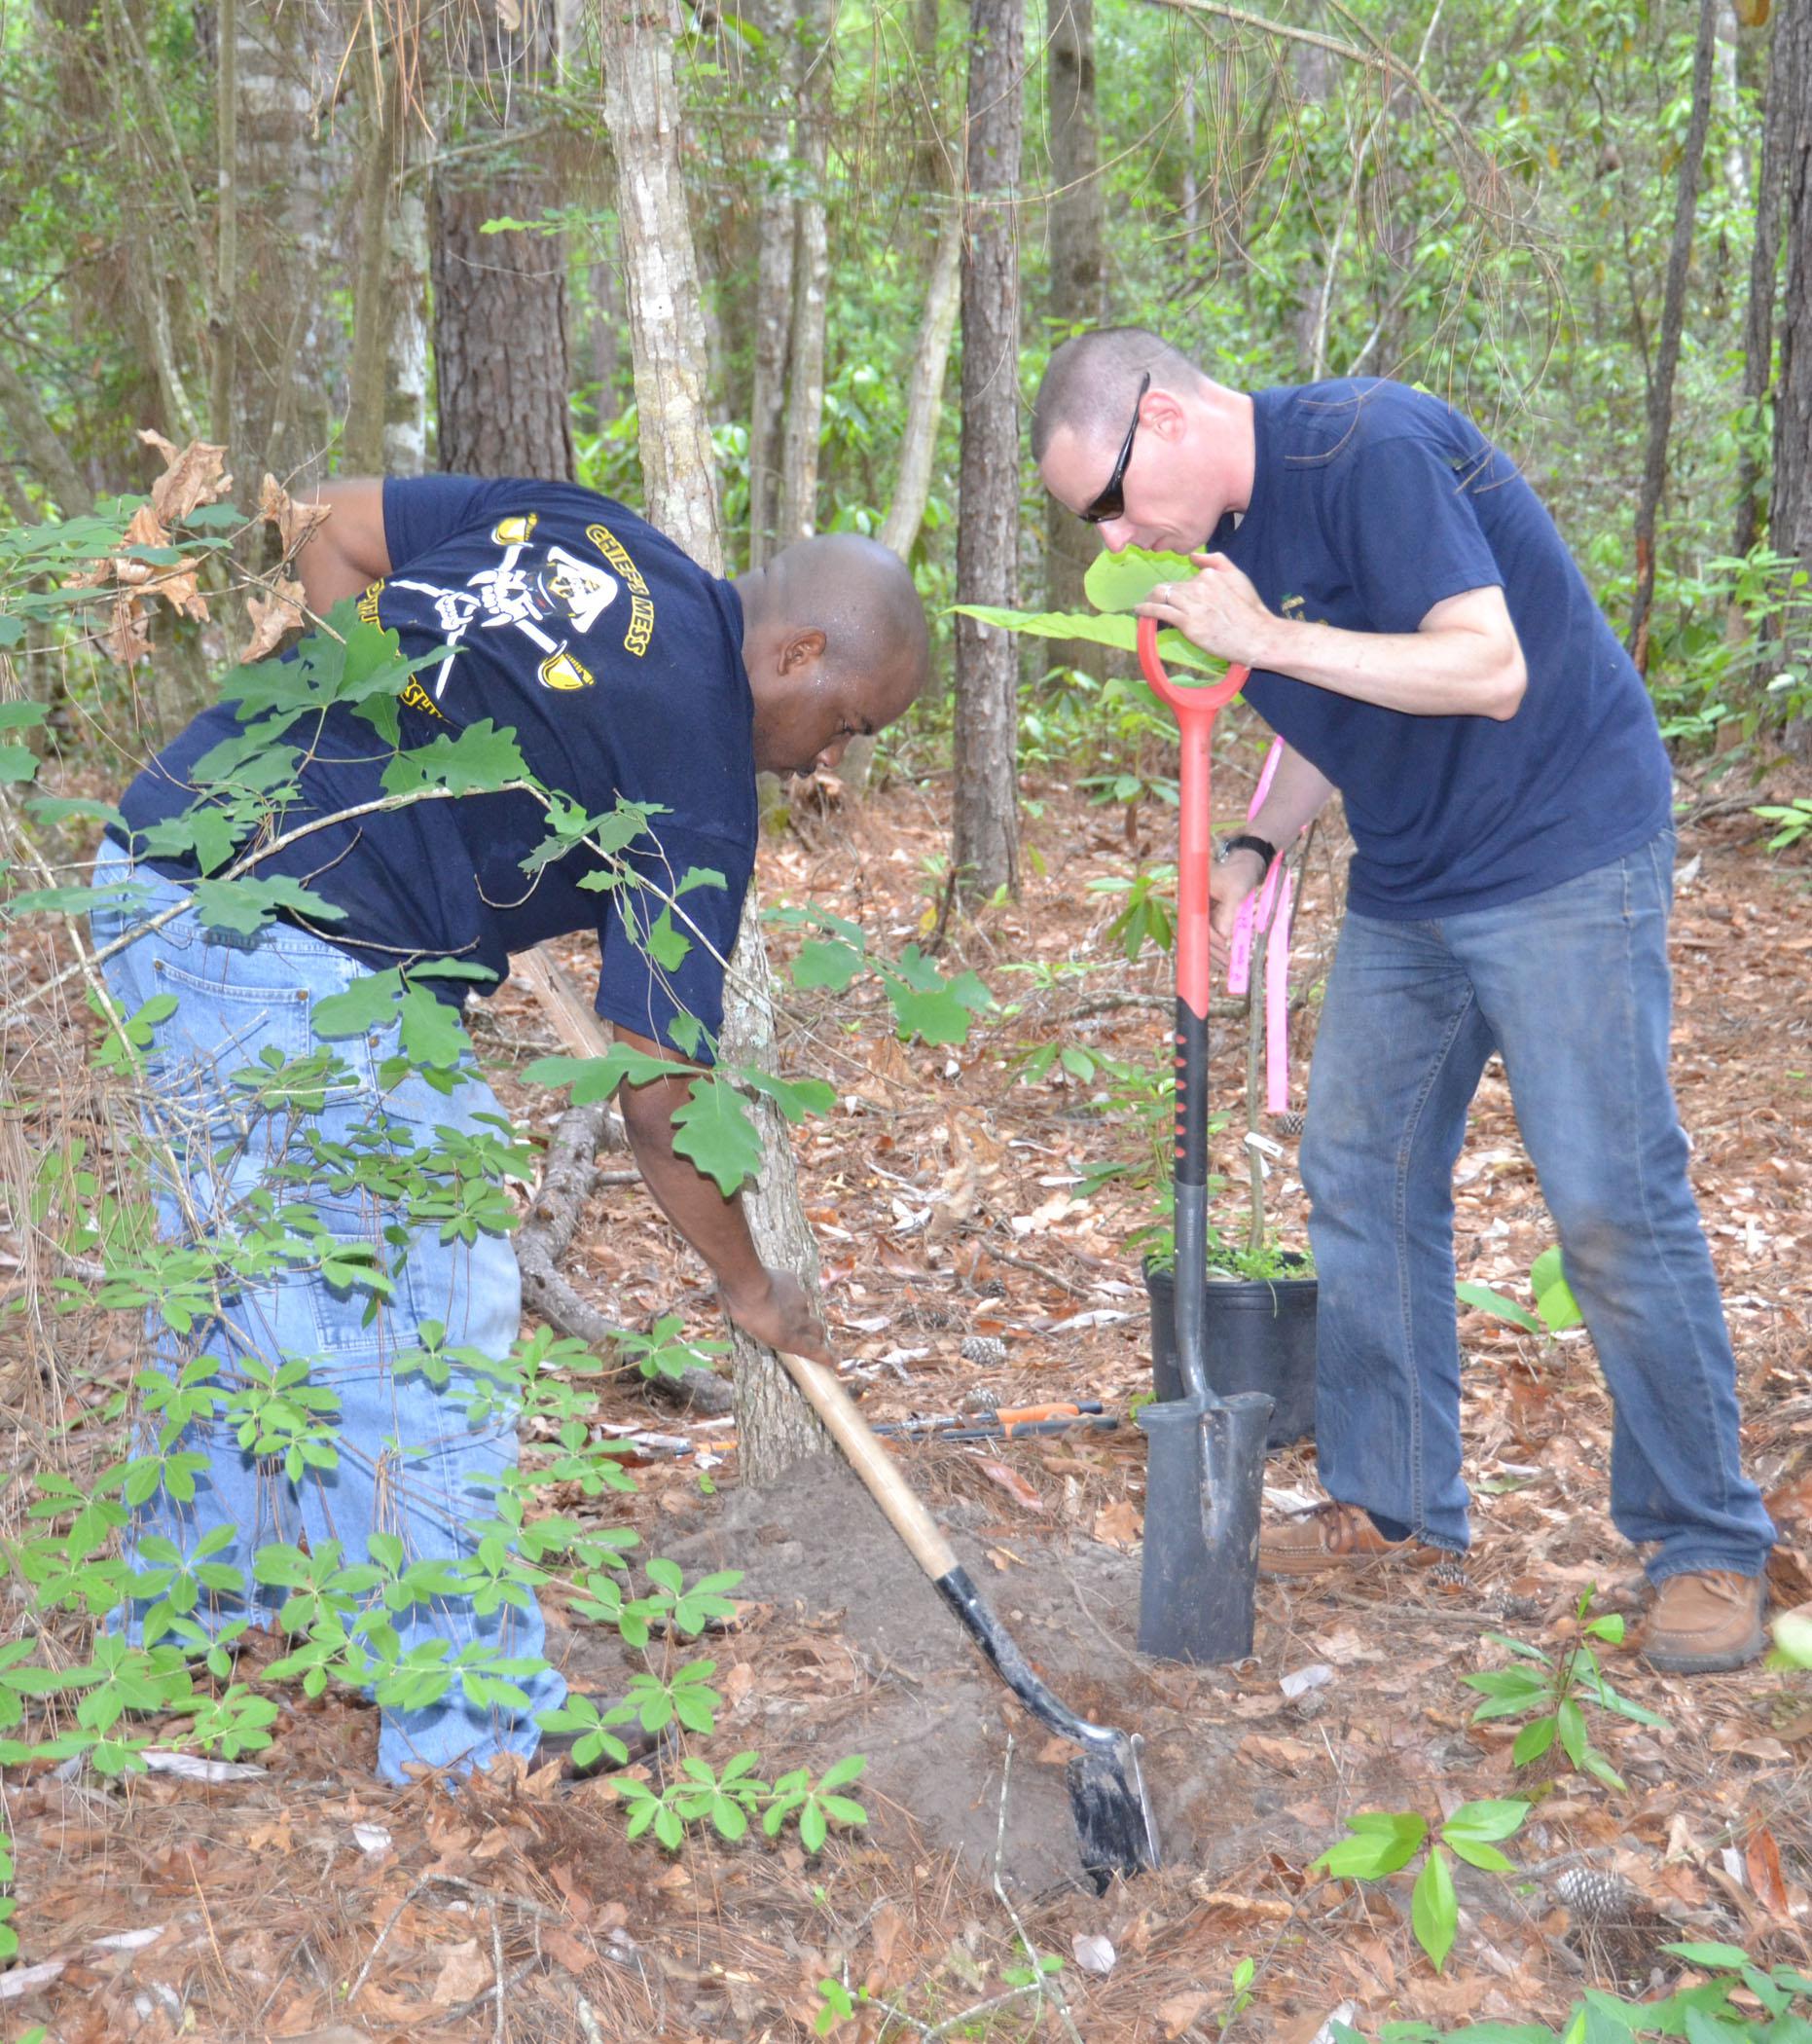 Navy Chief Contrail Allen, left, and Navy Chief Ryan Done plant a Bigleaf Magnolia on the Arrival Journey Exhibit at the Crosby Arboretum on May 8. About 20 Navy volunteers from the Stennis Space Center helped repaint the entrance gates, prune vegetation along the trails and construct part of the new Swamp Forest Education Exhibit. (Photos by Susan Collins-Smith)